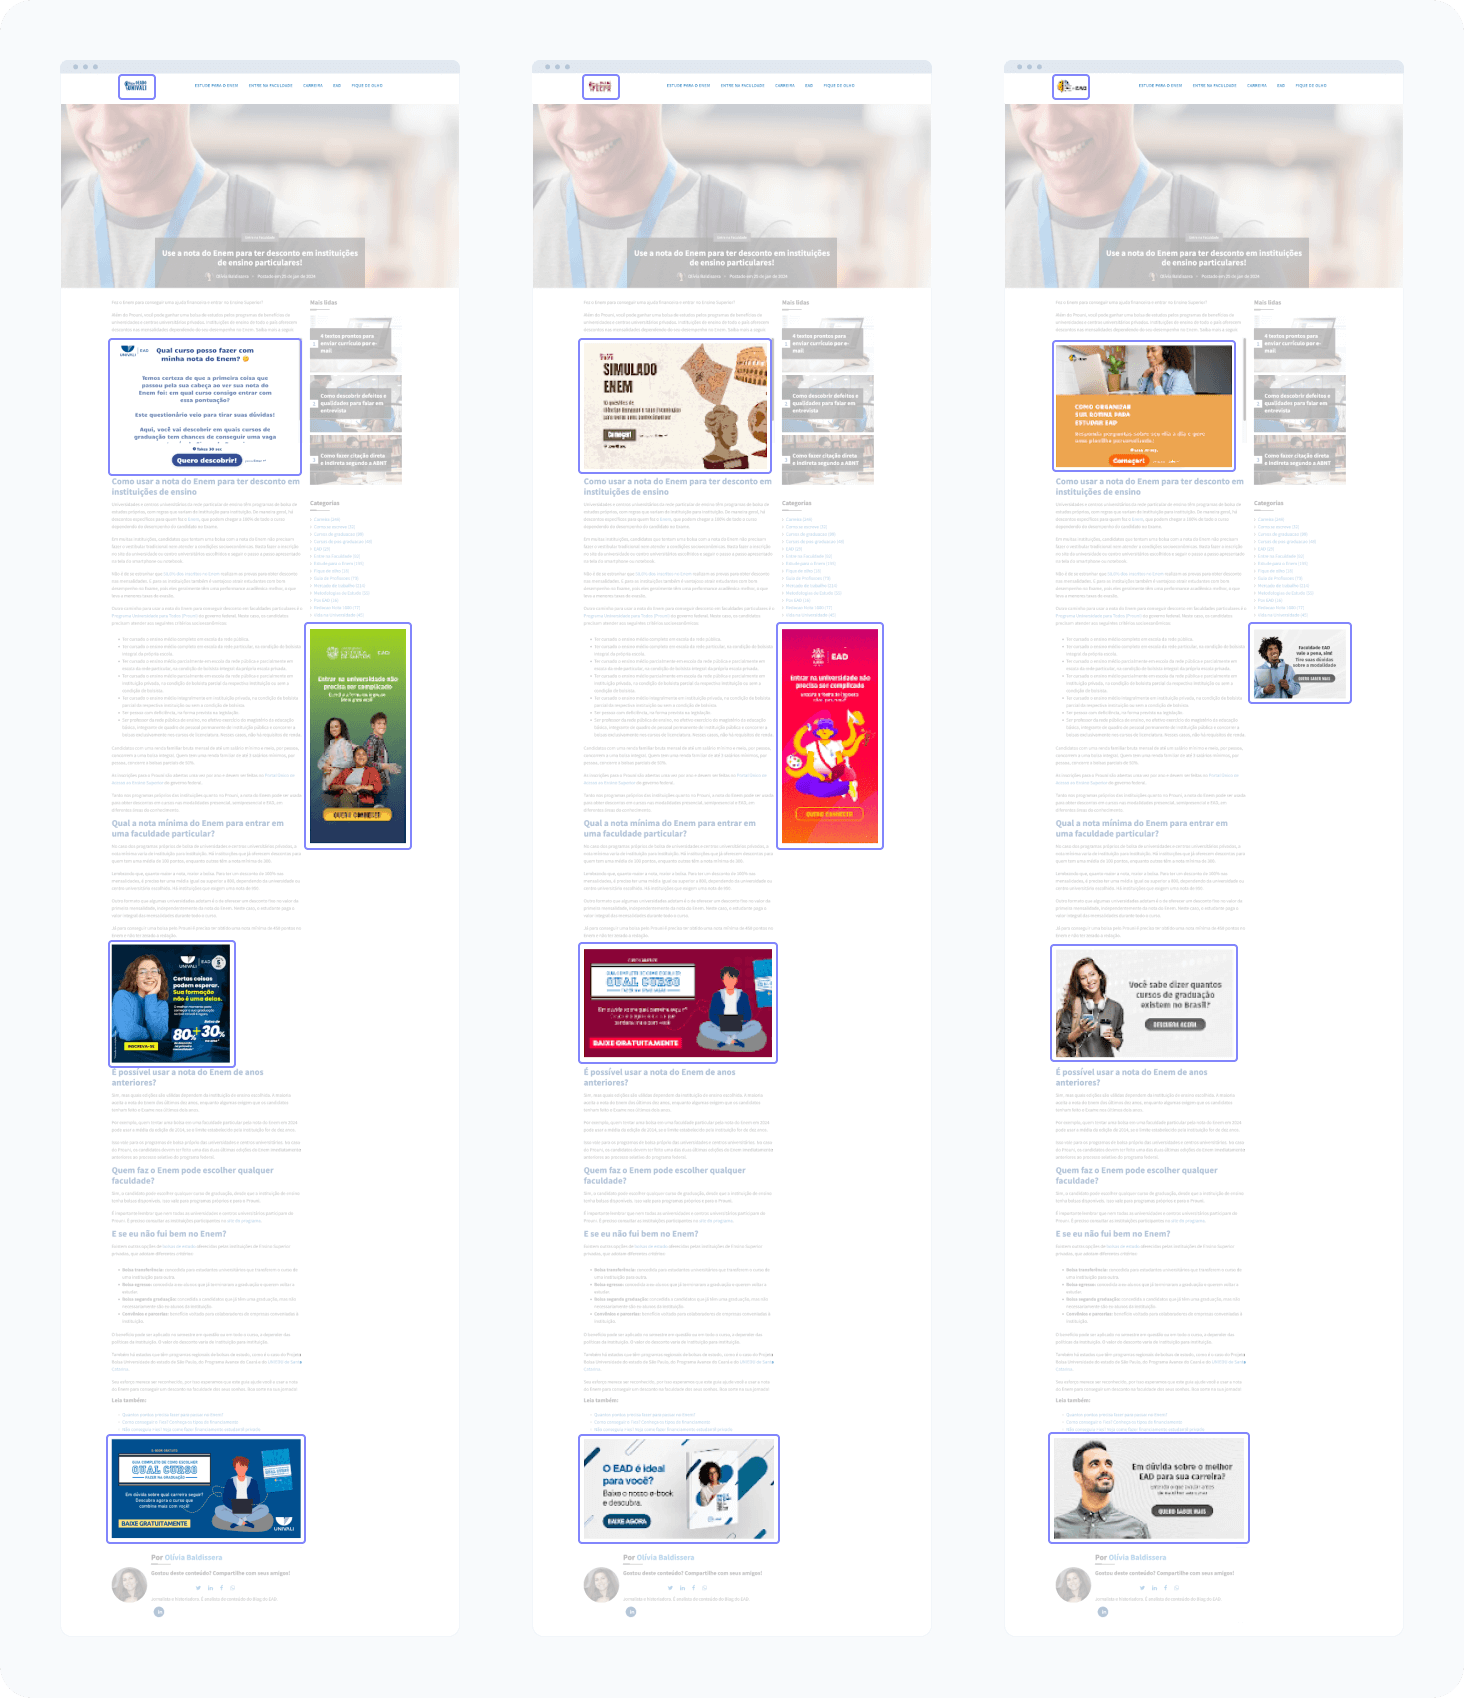 Screenshots of three different versions of the same blog post with personalized banners.